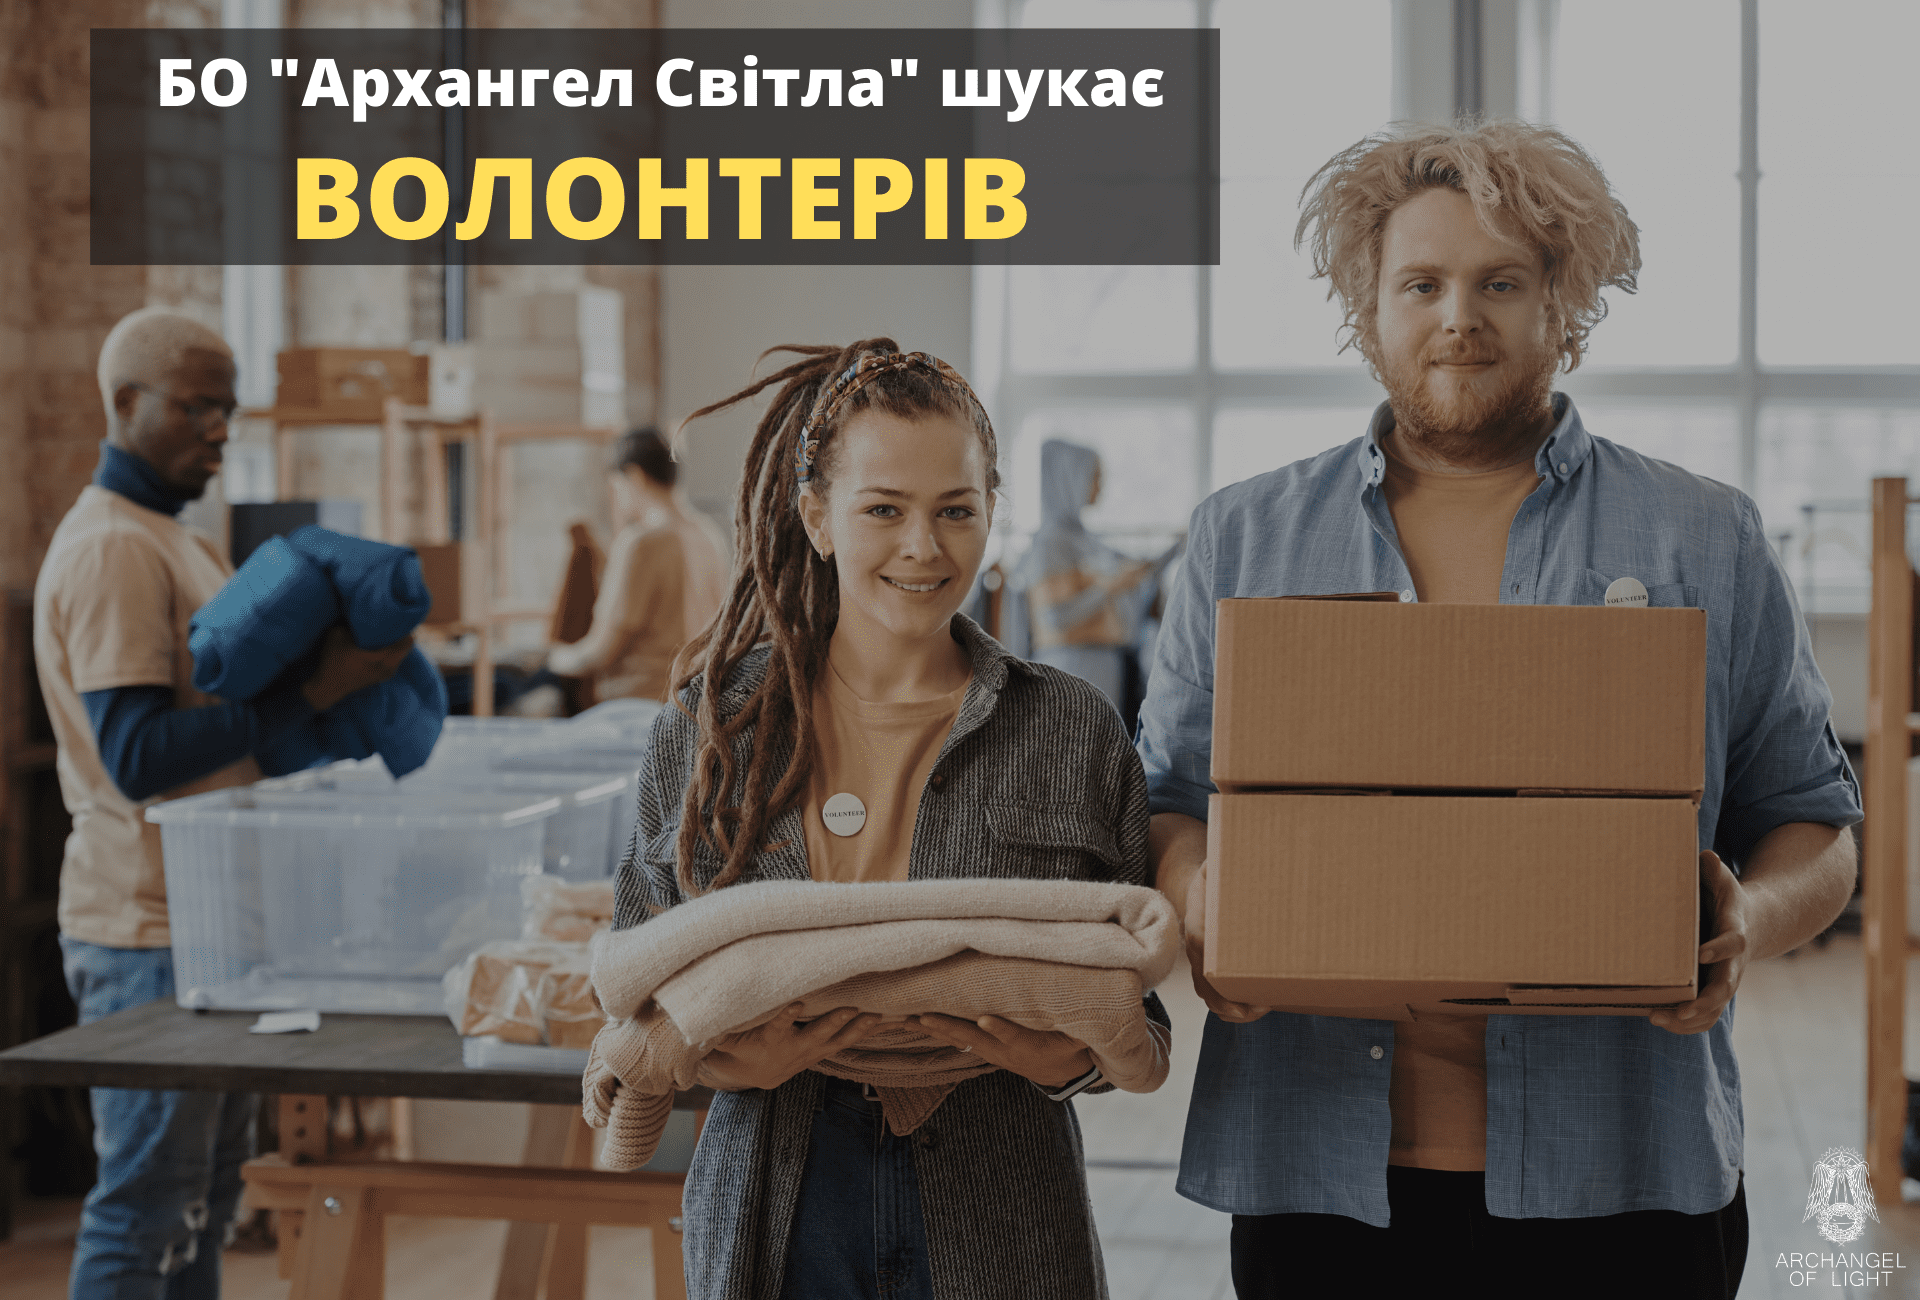 We are looking for volunteers in Ukraine and abroad!